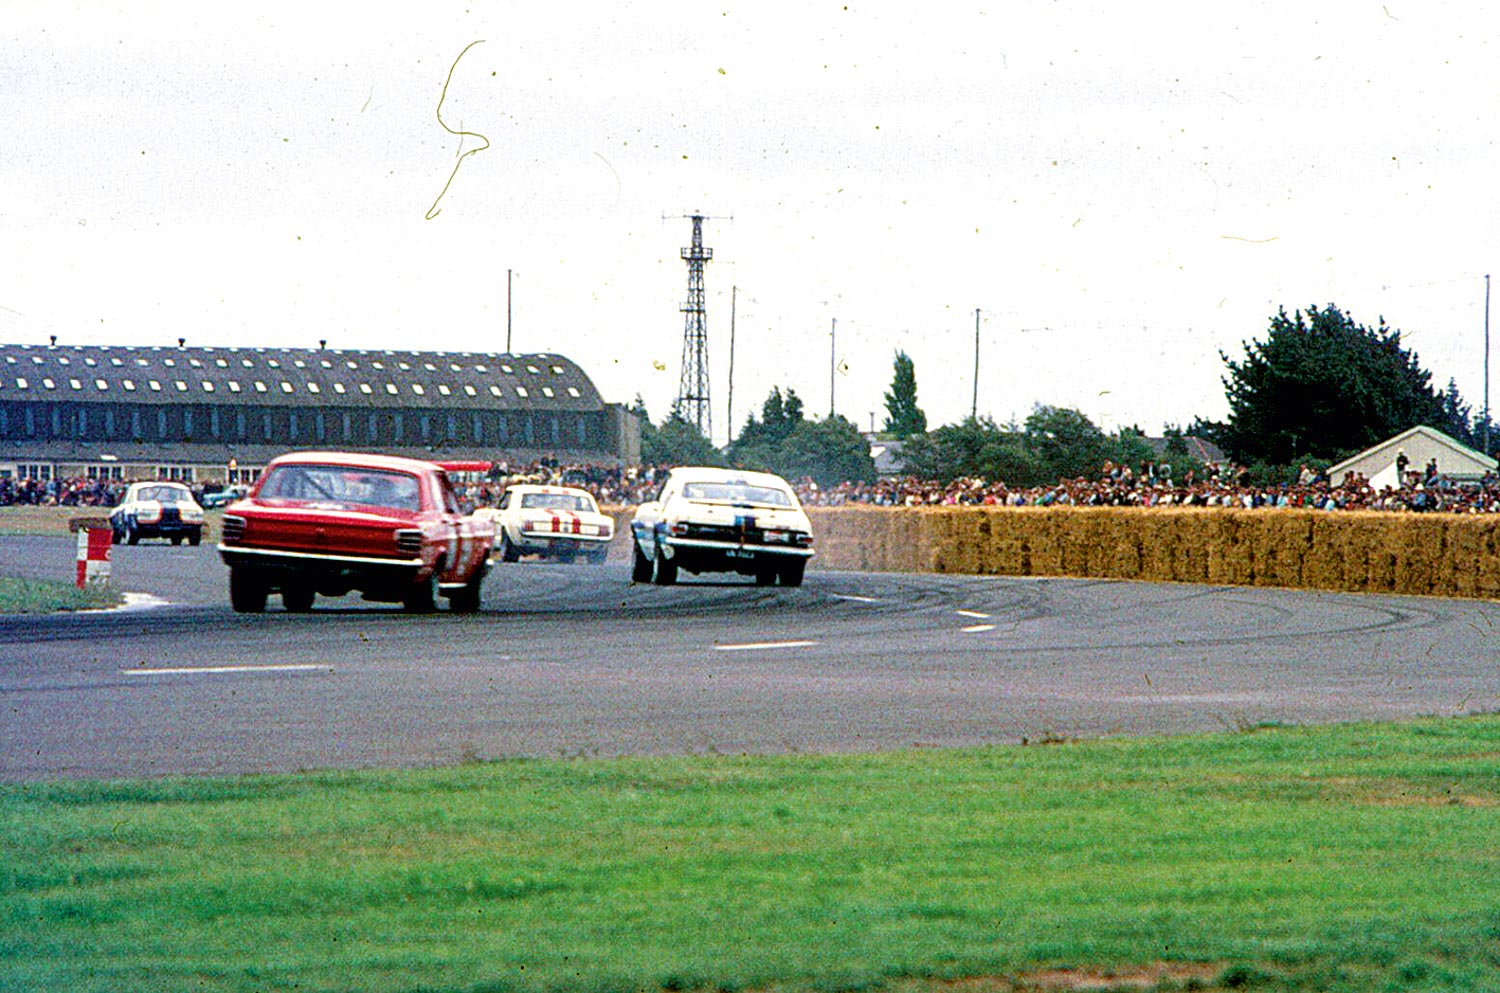 Clyde Collins in the PDL Falcon chases Grady Thomson in the Cambridge Monaro in 1970